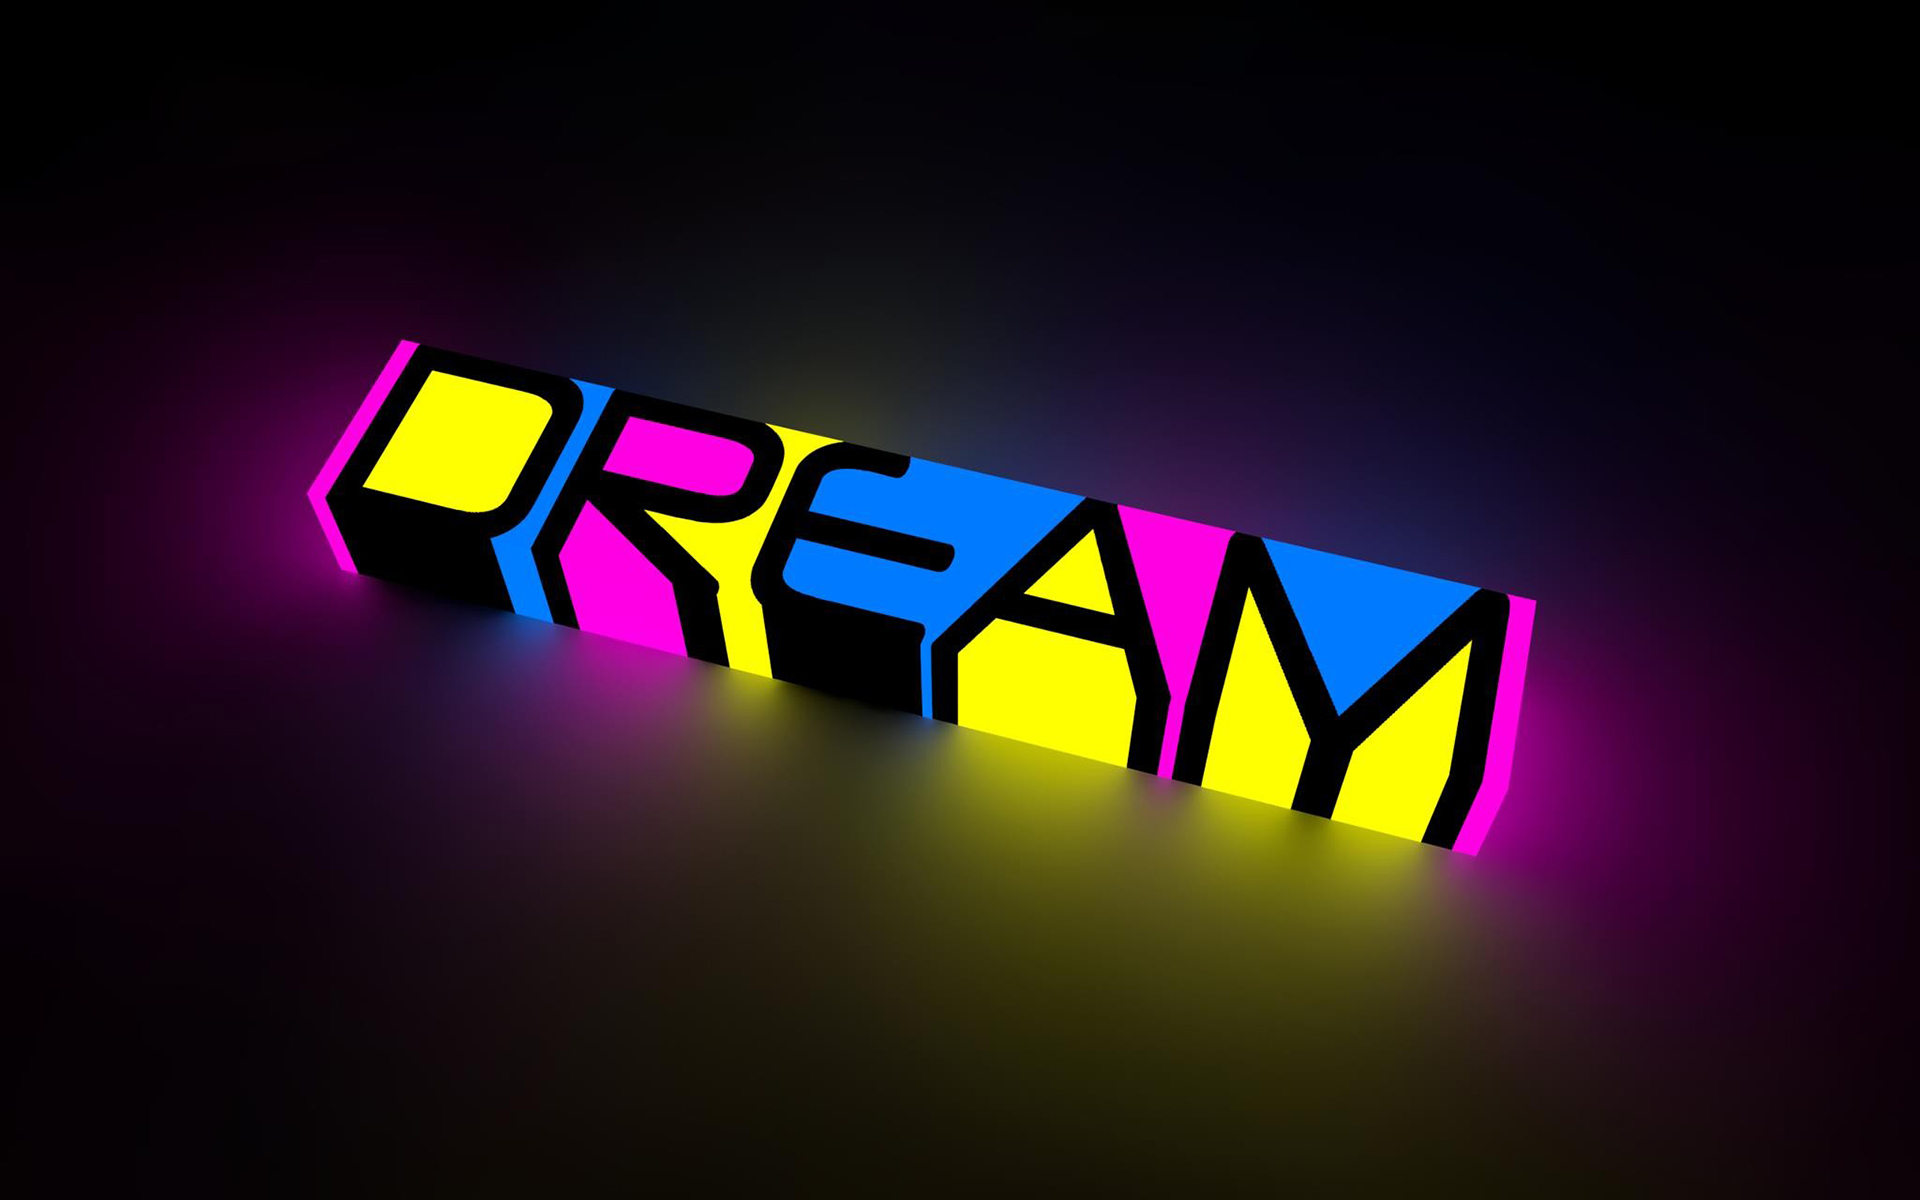 Abstract Dream Color Neon Bright Words Letters Motivational